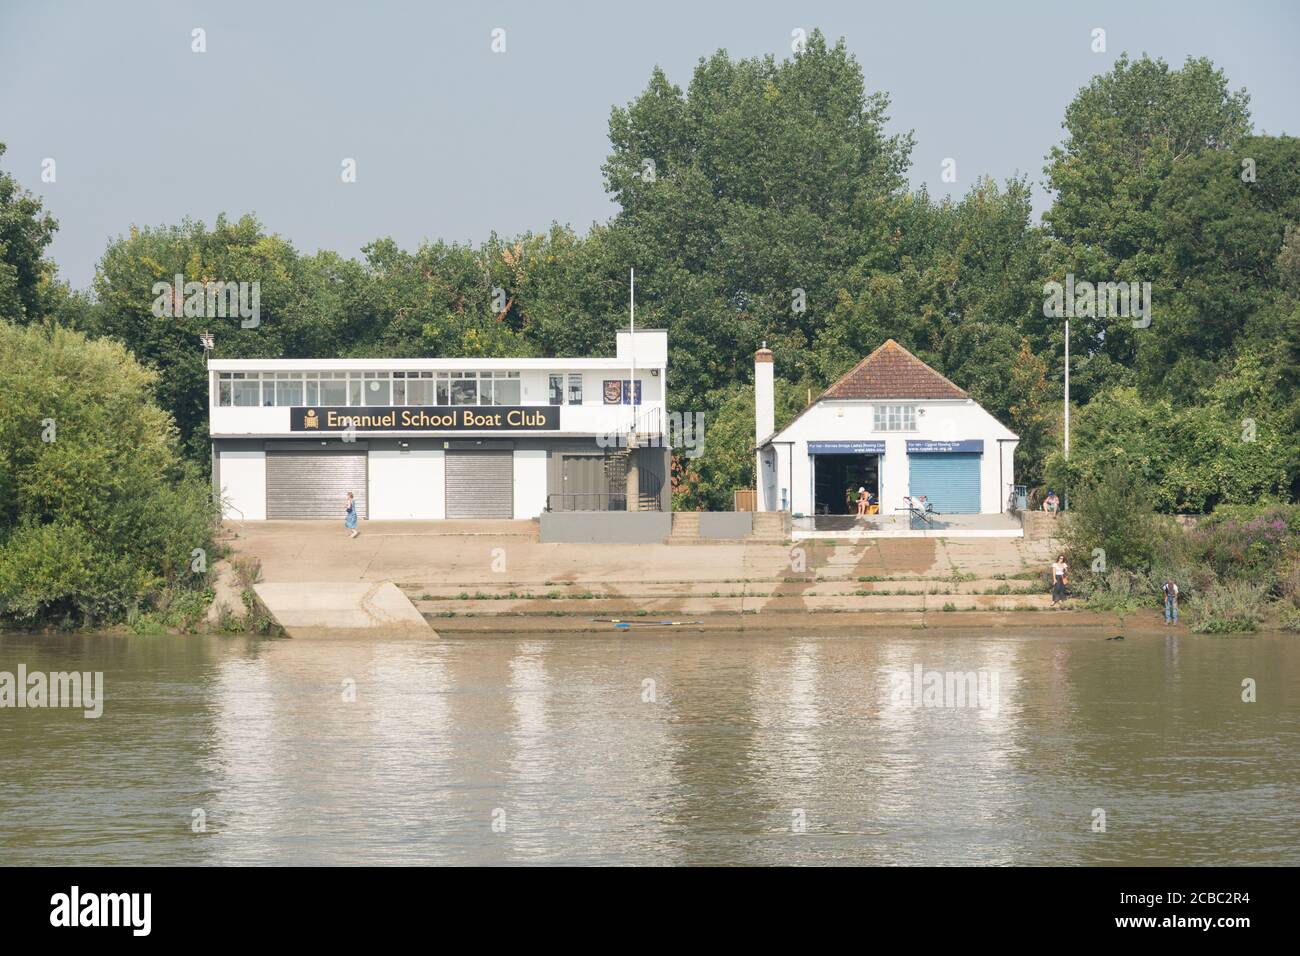 Emanuel School Boathouse and the Civil Service Boathouse, in Duke's Meadows, London, W4, UK. Stock Photo